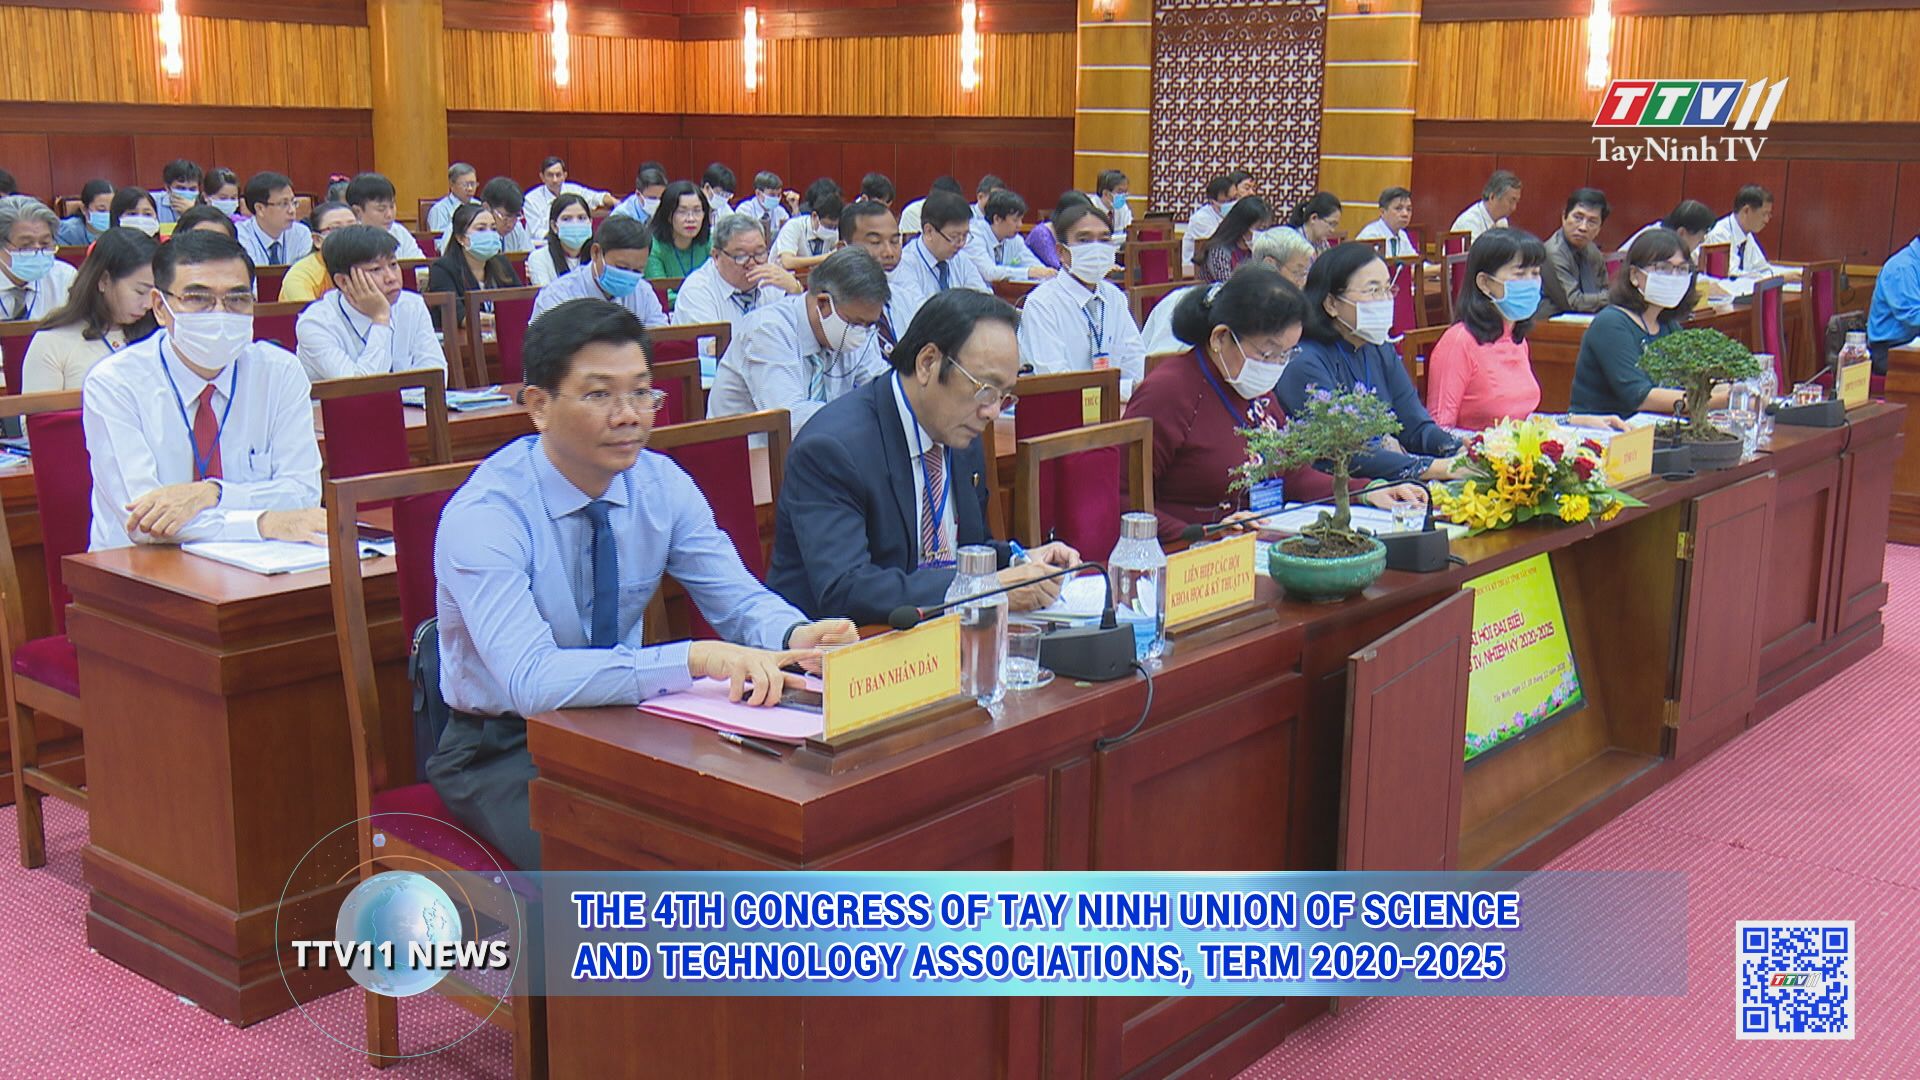 The 4th Congress of Tay Ninh Union of Science and Technology Associations, term 2020-2025 | TTVNEWS | TayNinhTV Today